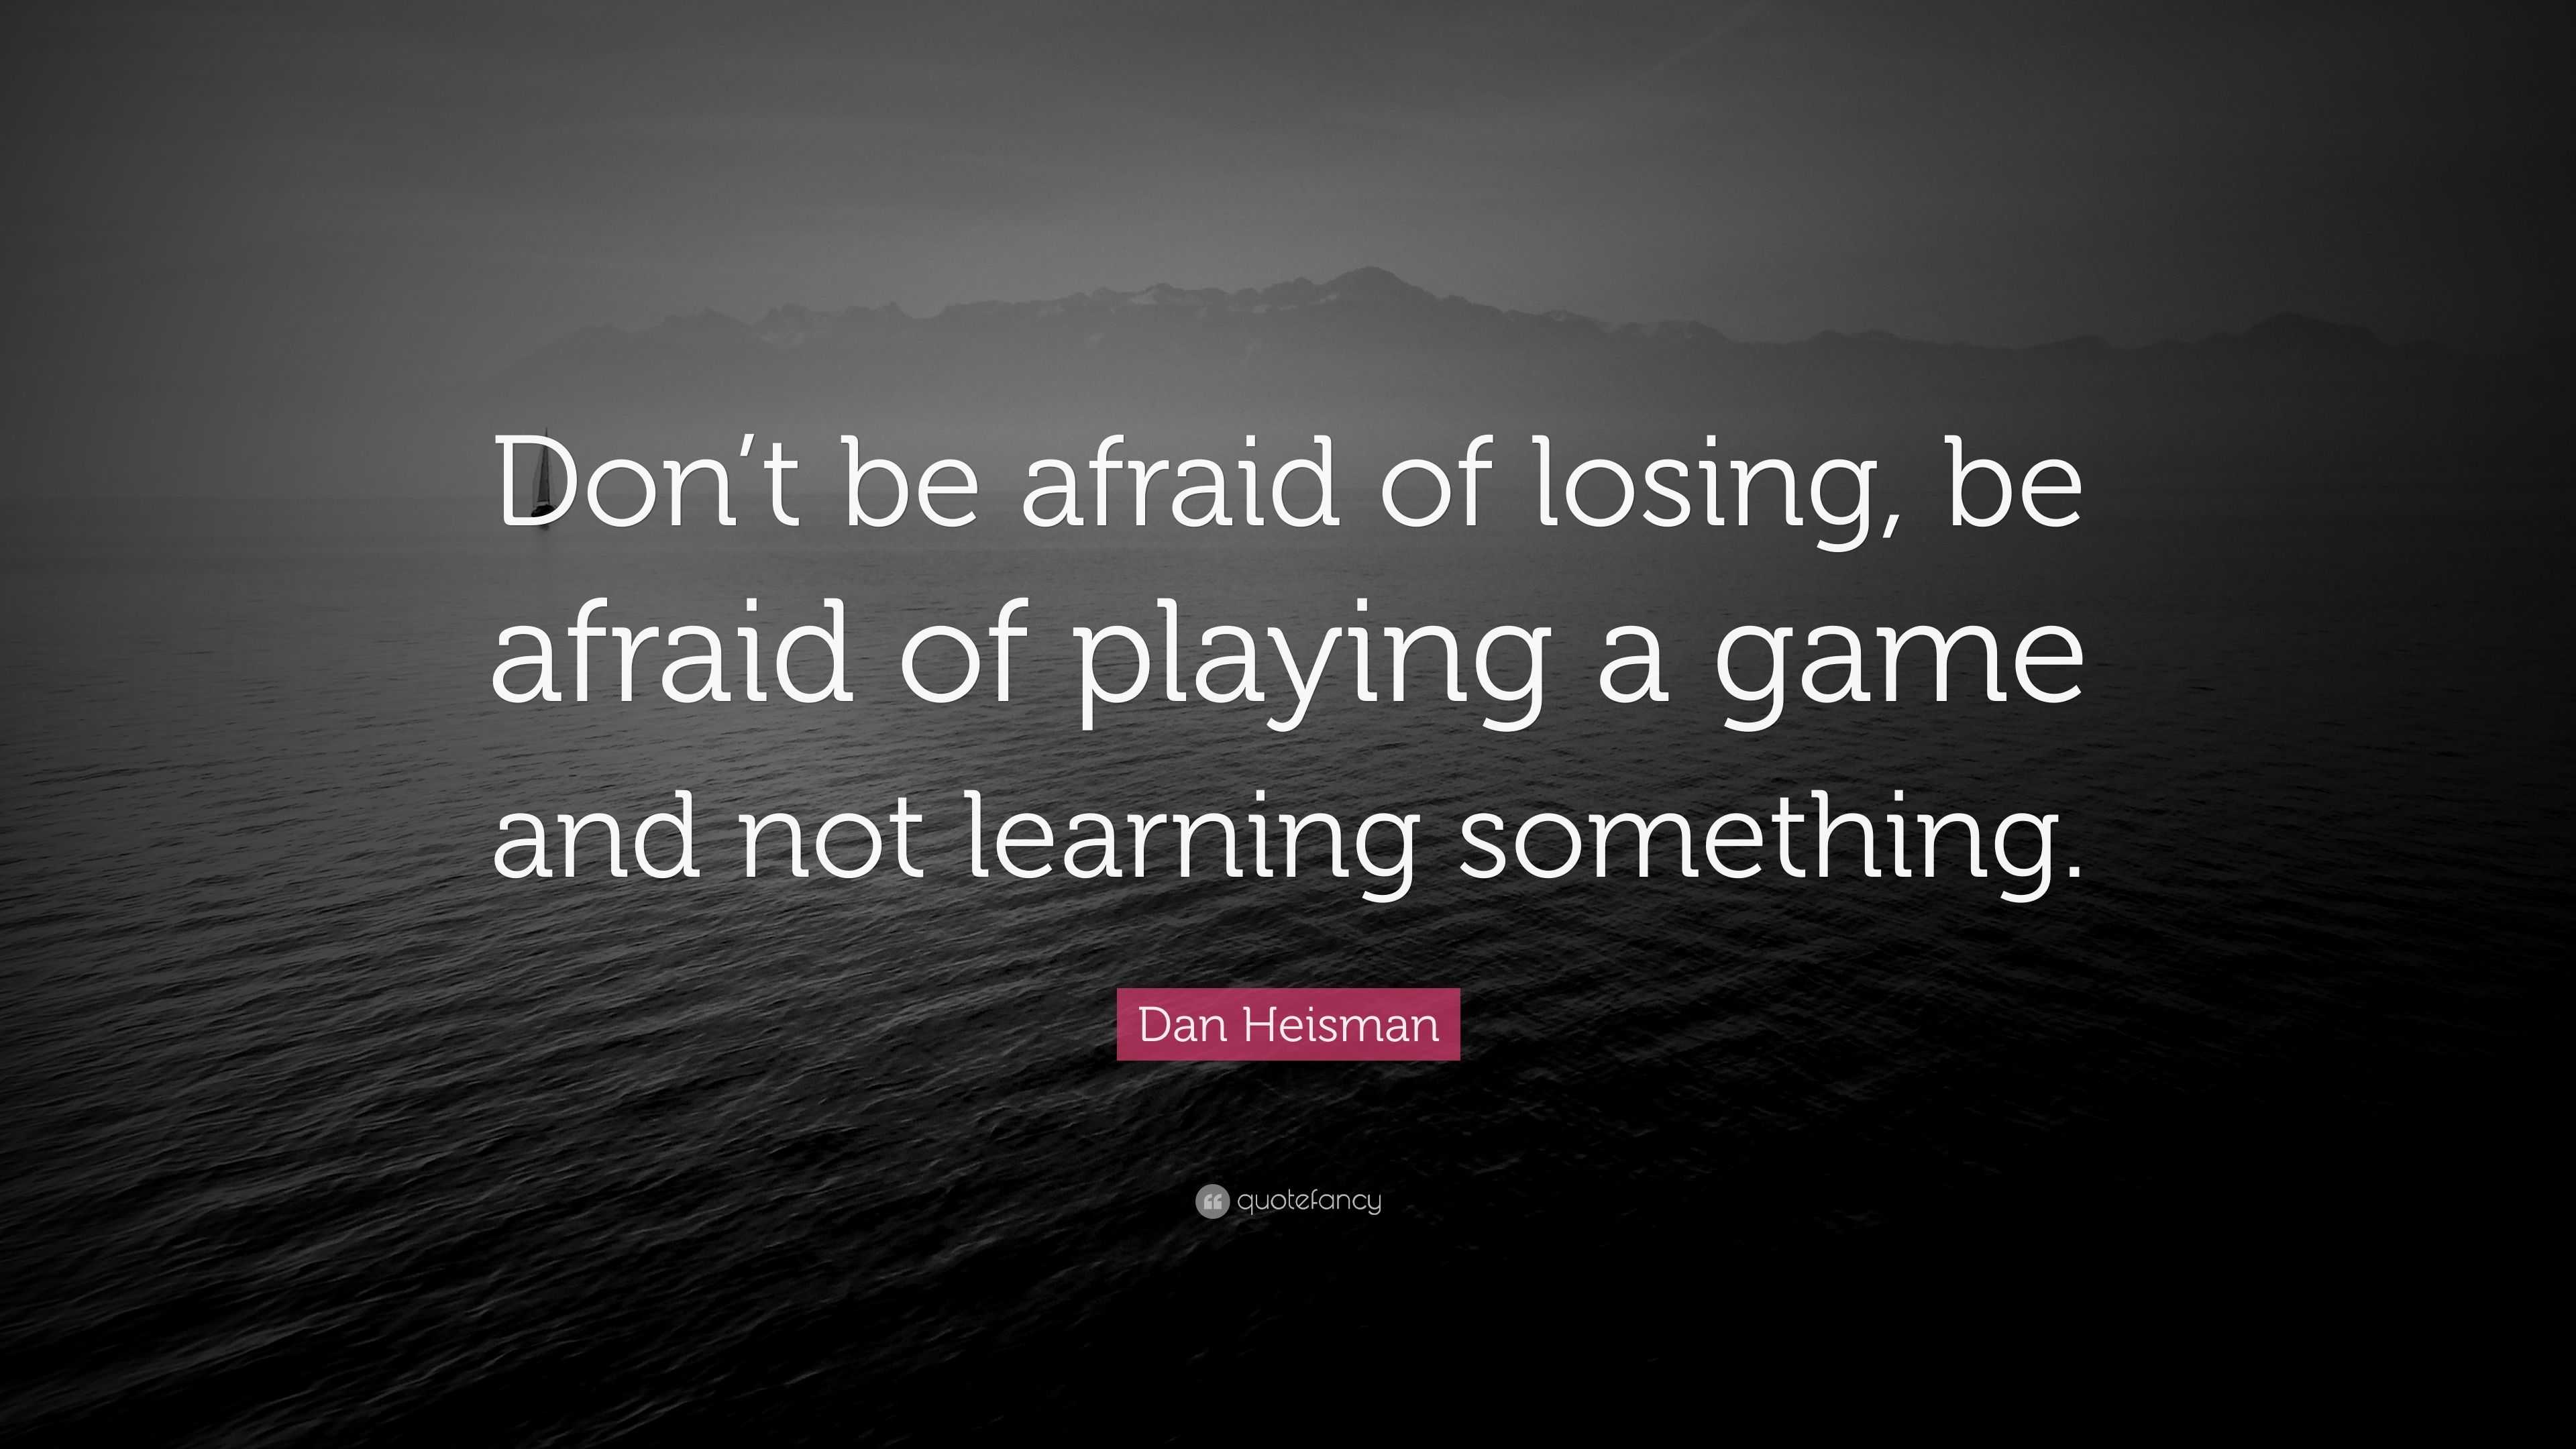 Dan Heisman Quote: “Don’t be afraid of losing, be afraid of playing a ...